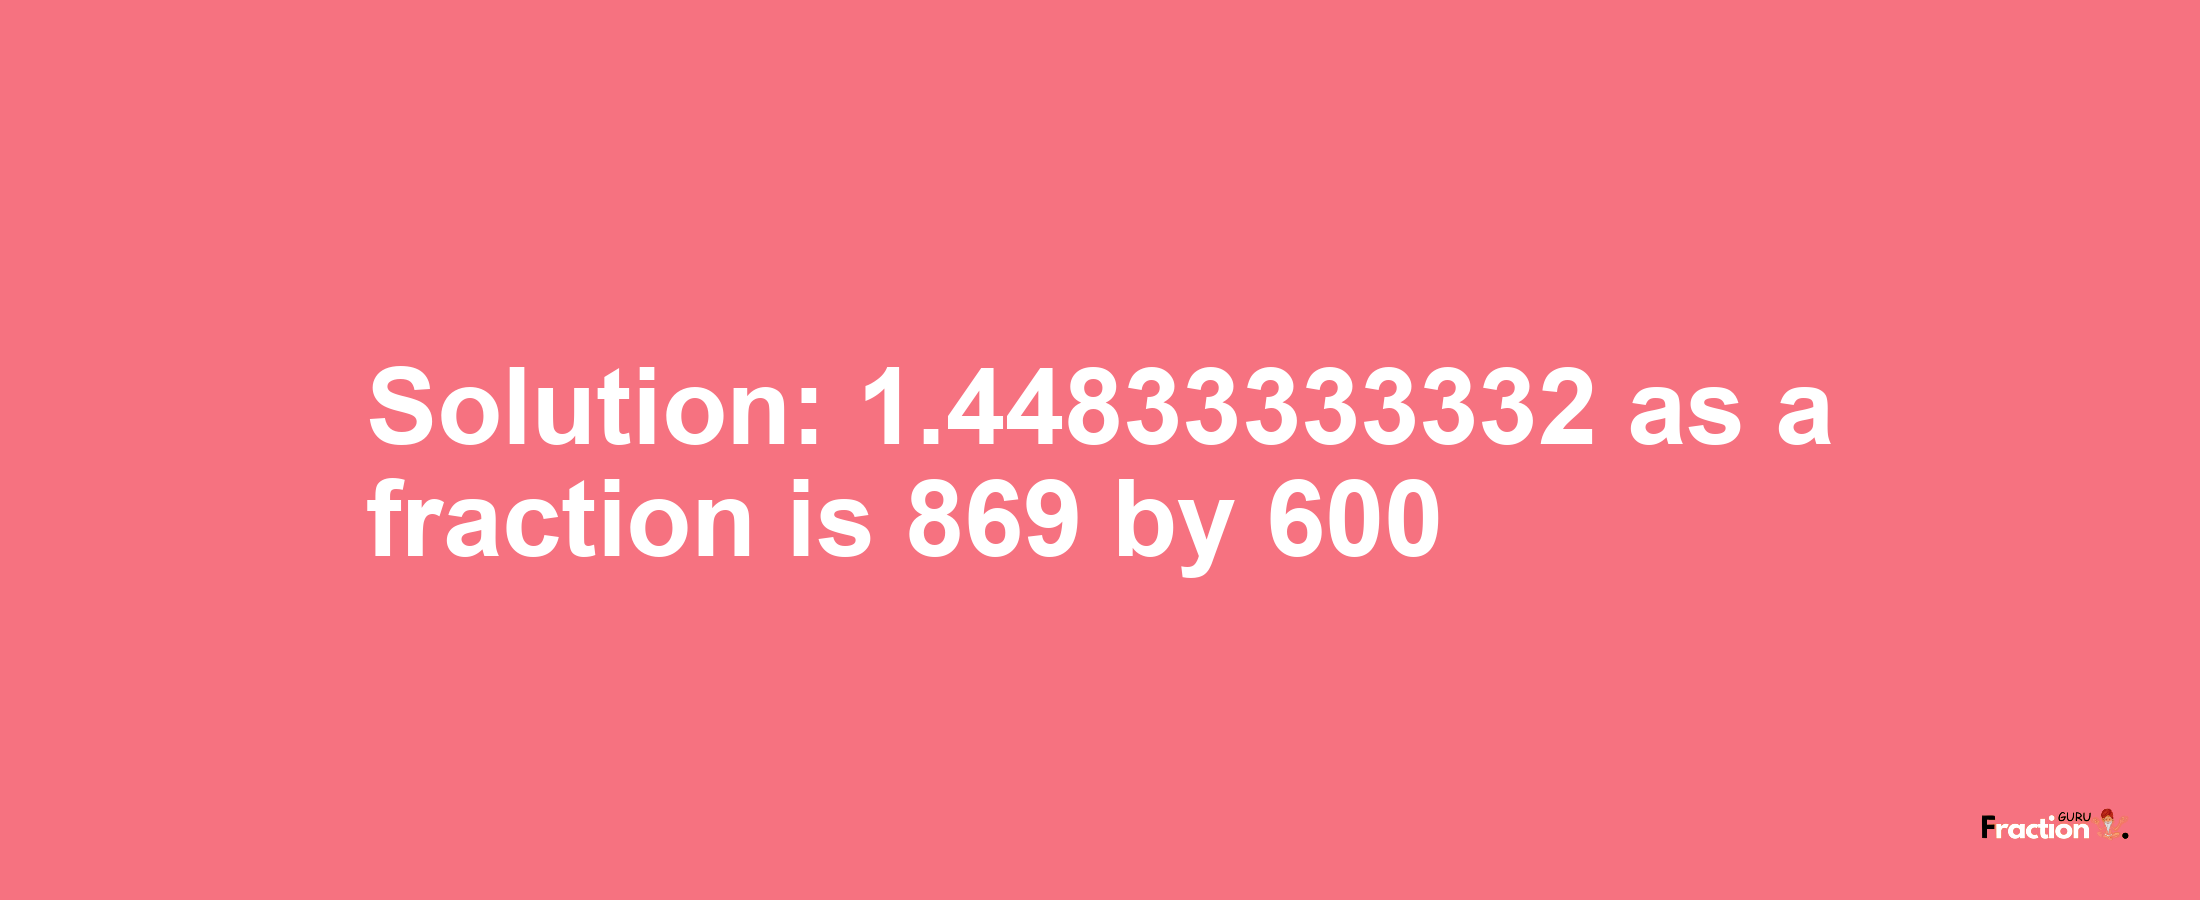 Solution:1.44833333332 as a fraction is 869/600